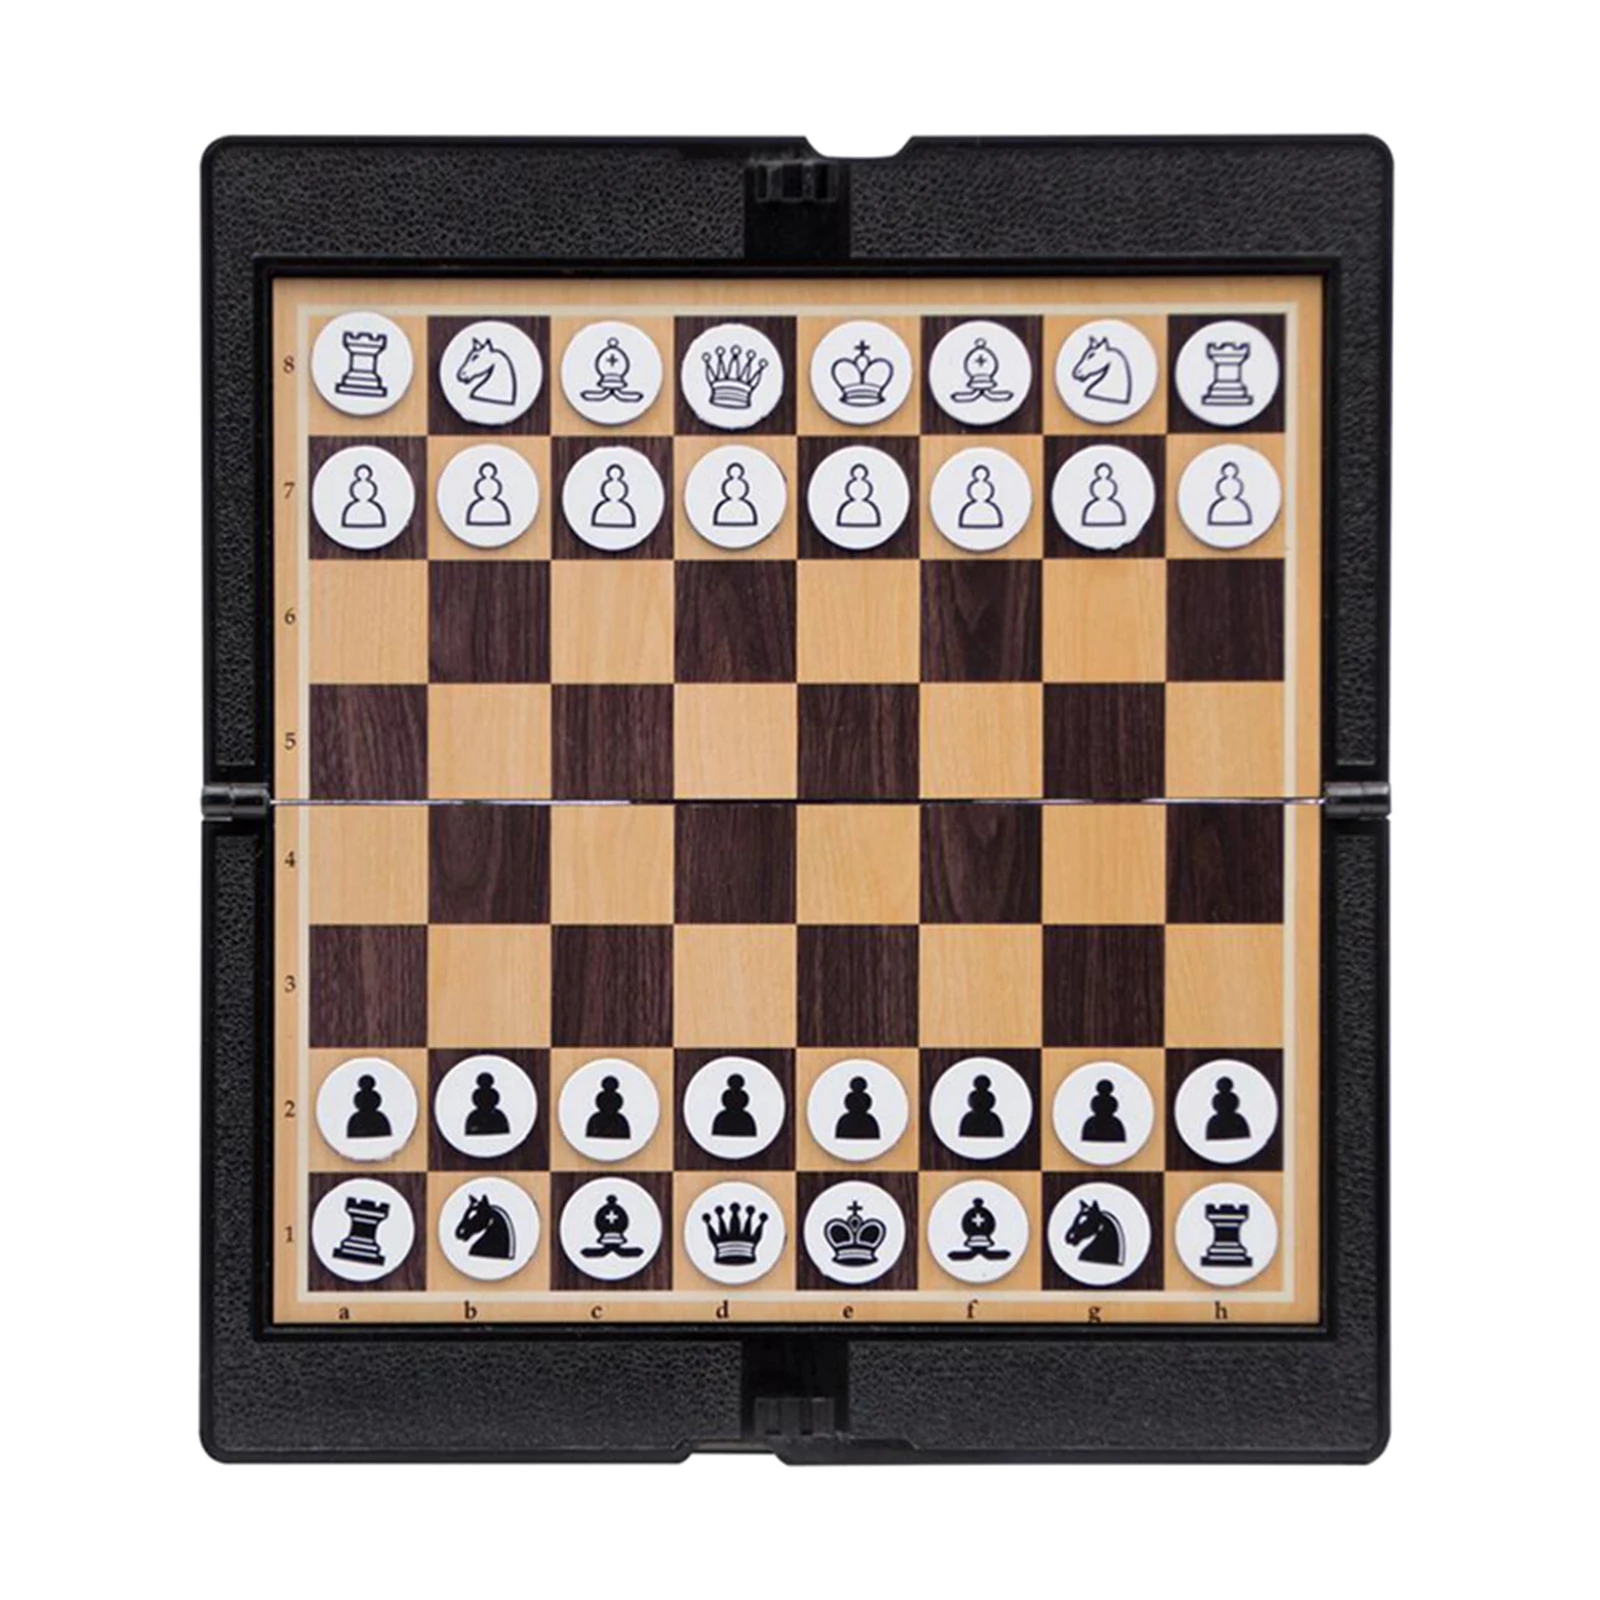 LLAni Foldable Wallet International Chess Magnetic Portable Checkers Board Game Super Thin Chessboard Family Party Game